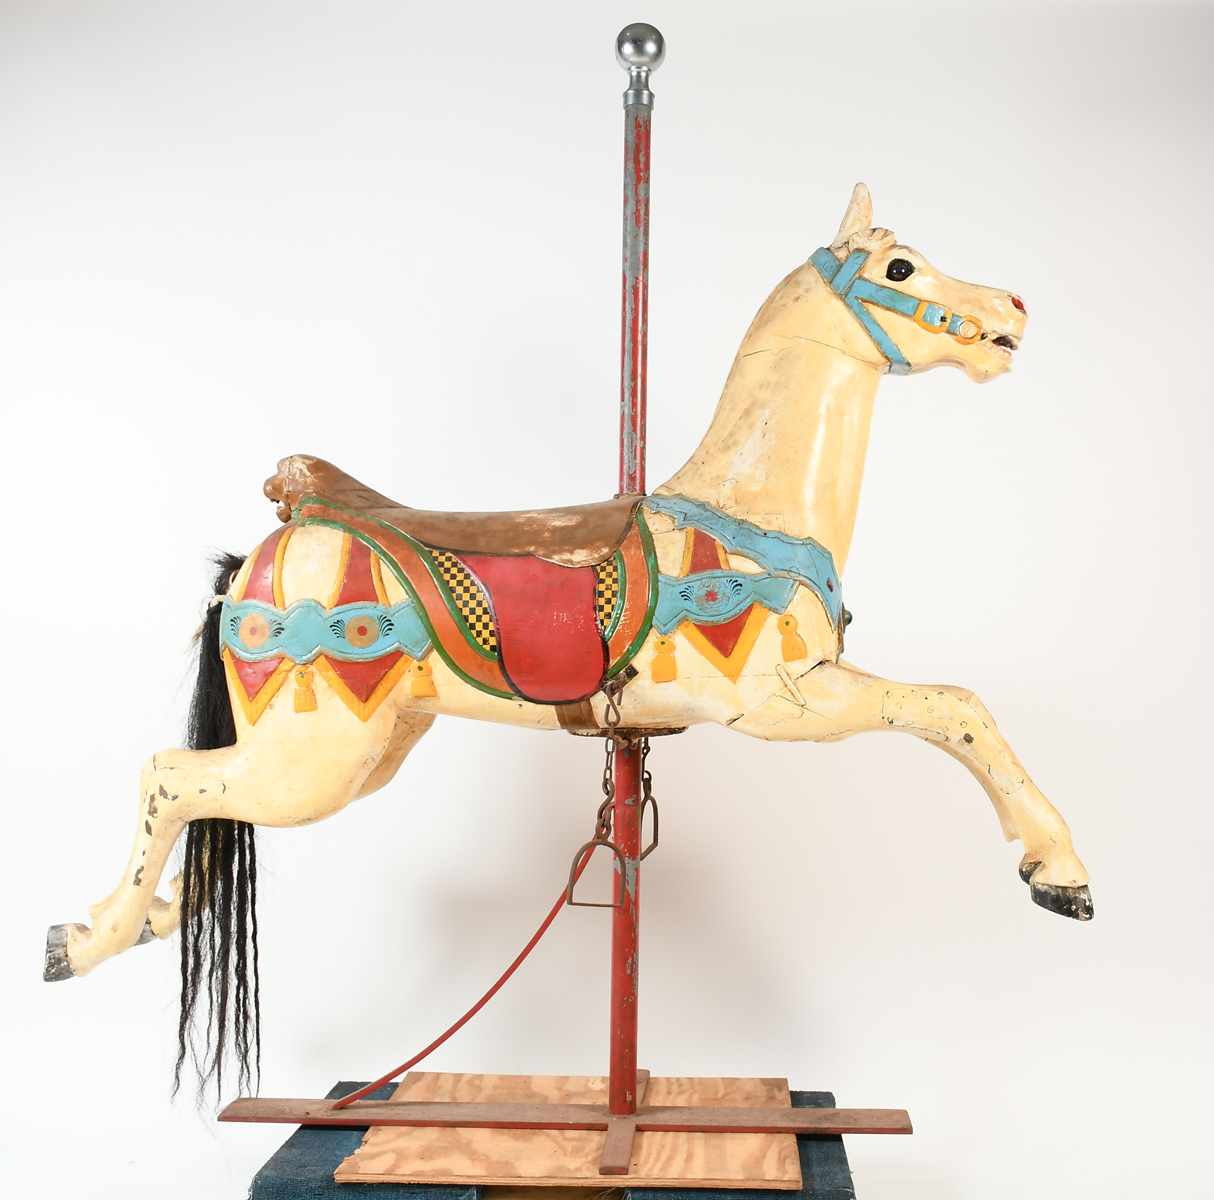 ENGLISH CAROUSEL HORSE: Early hand-carved